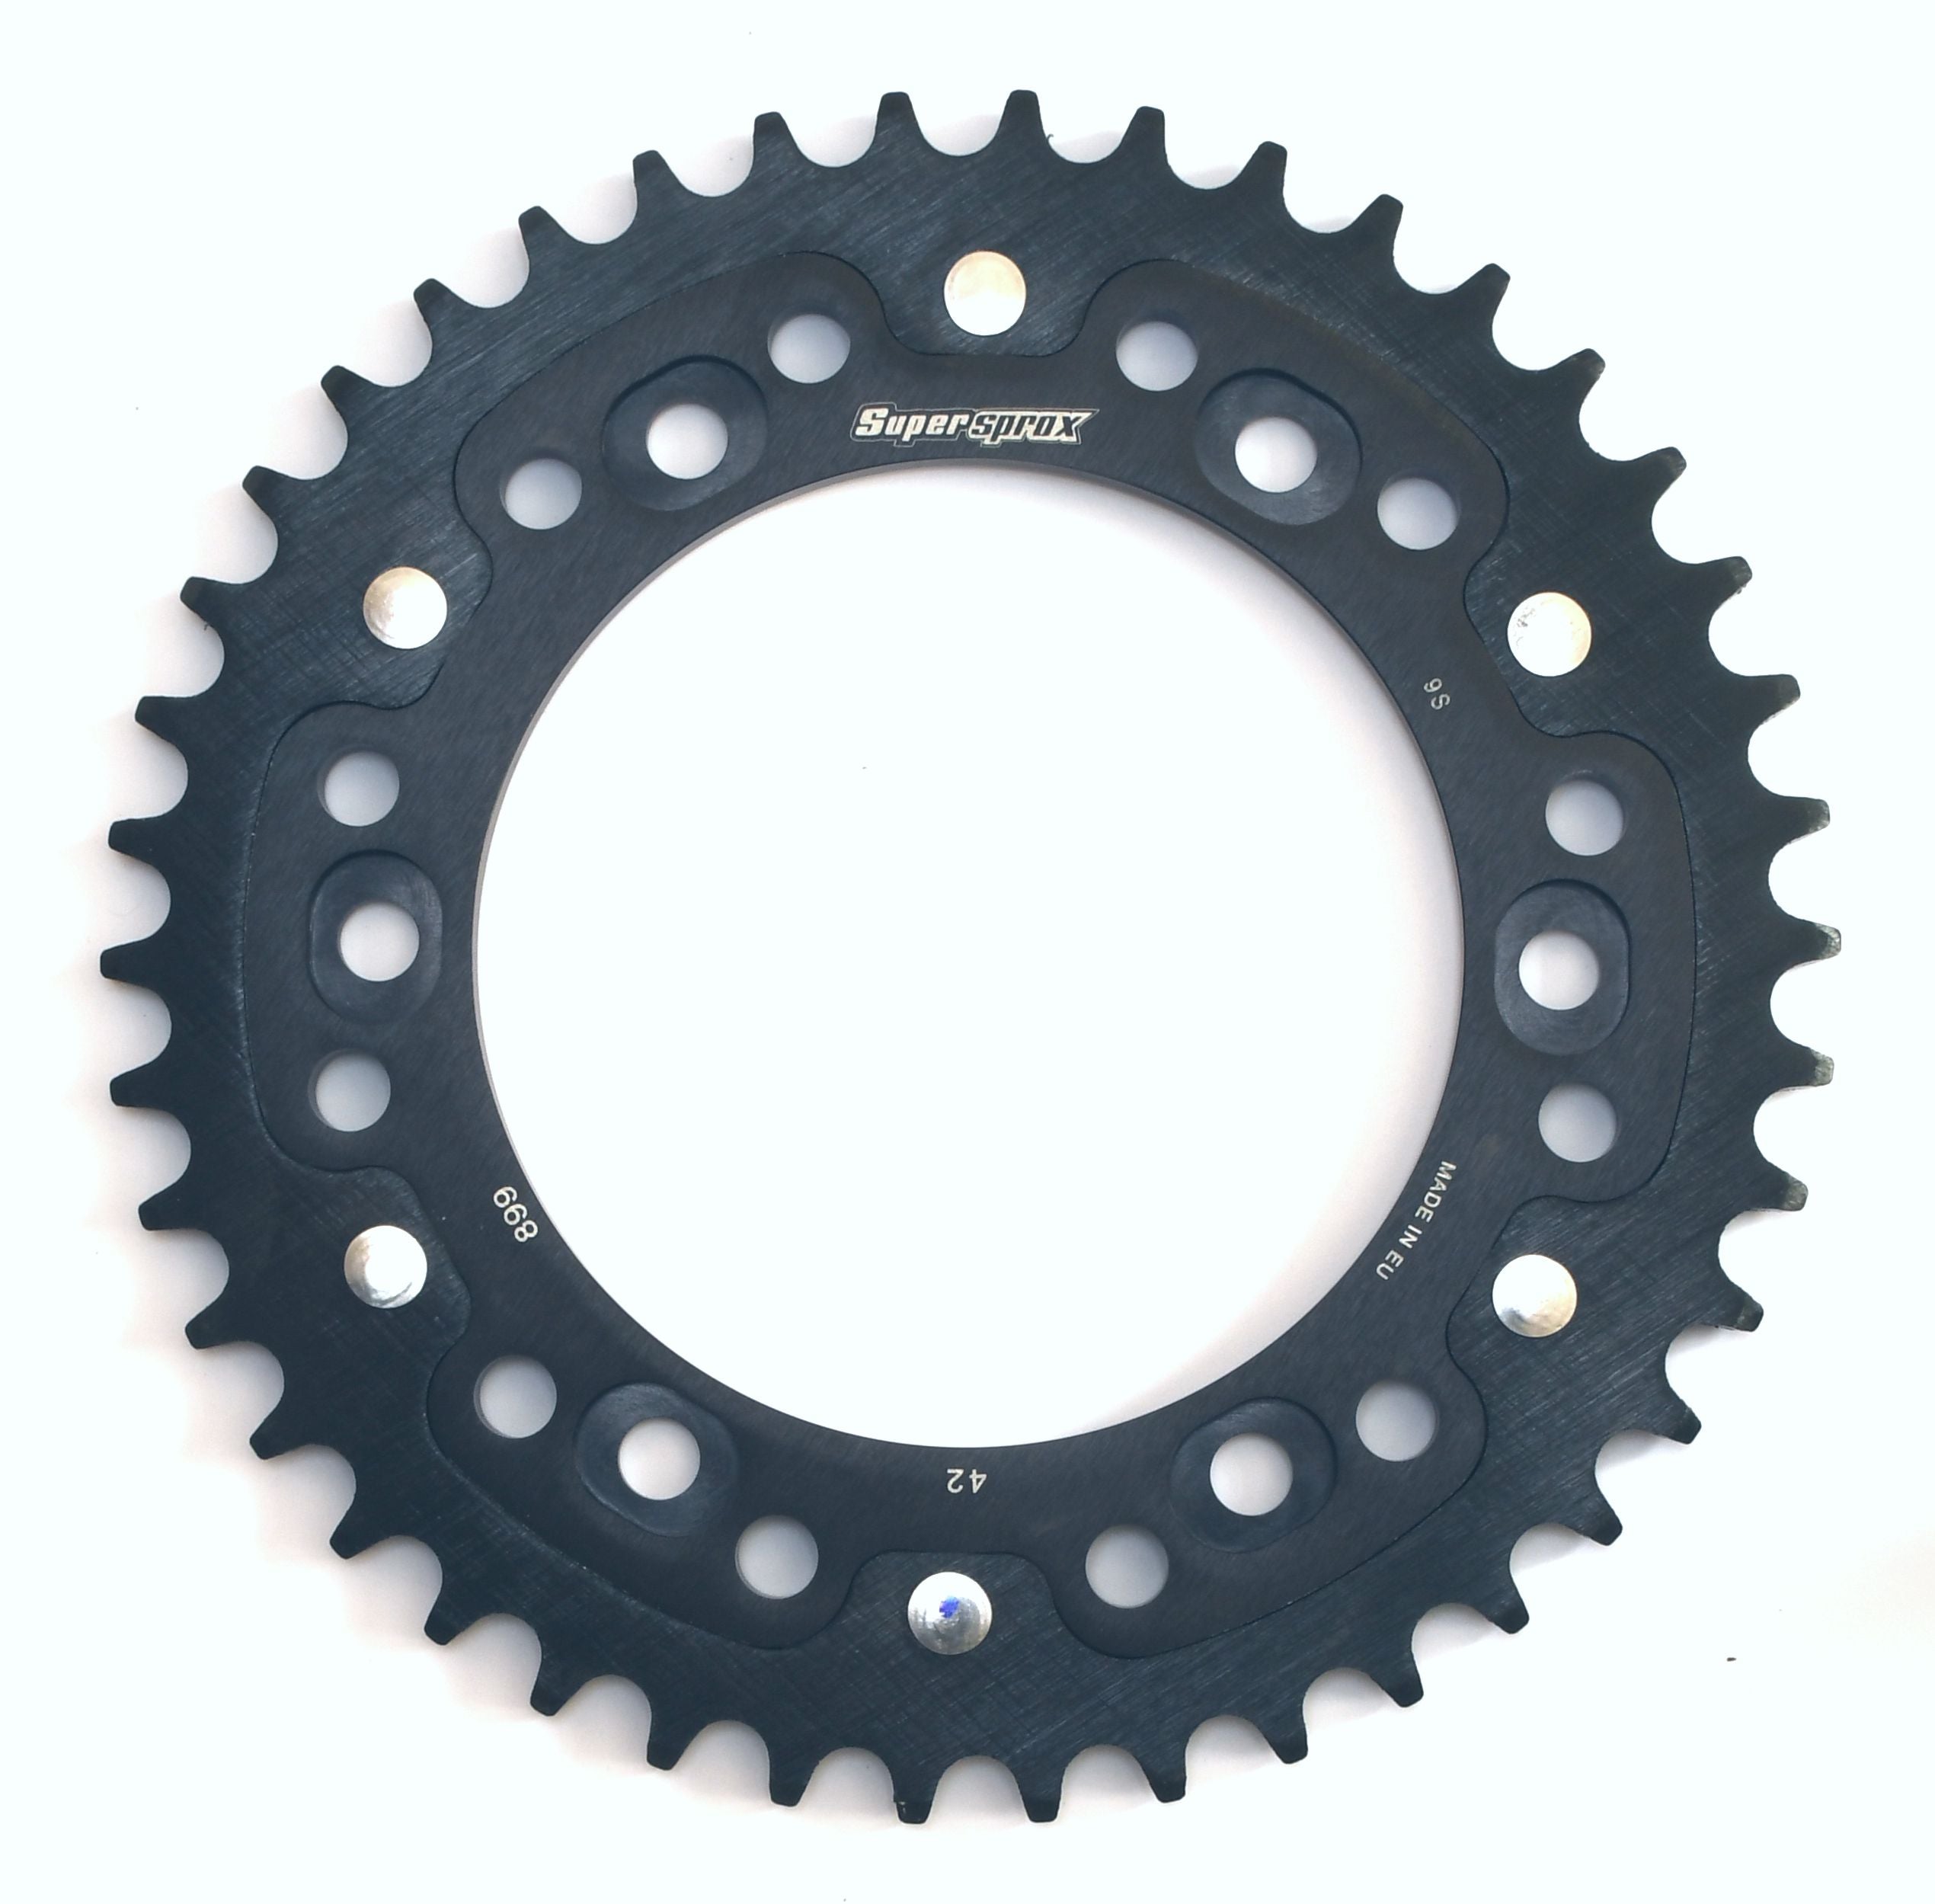 Supersprox Rear Sprocket RST-899 - Choose Your Gearing - 0